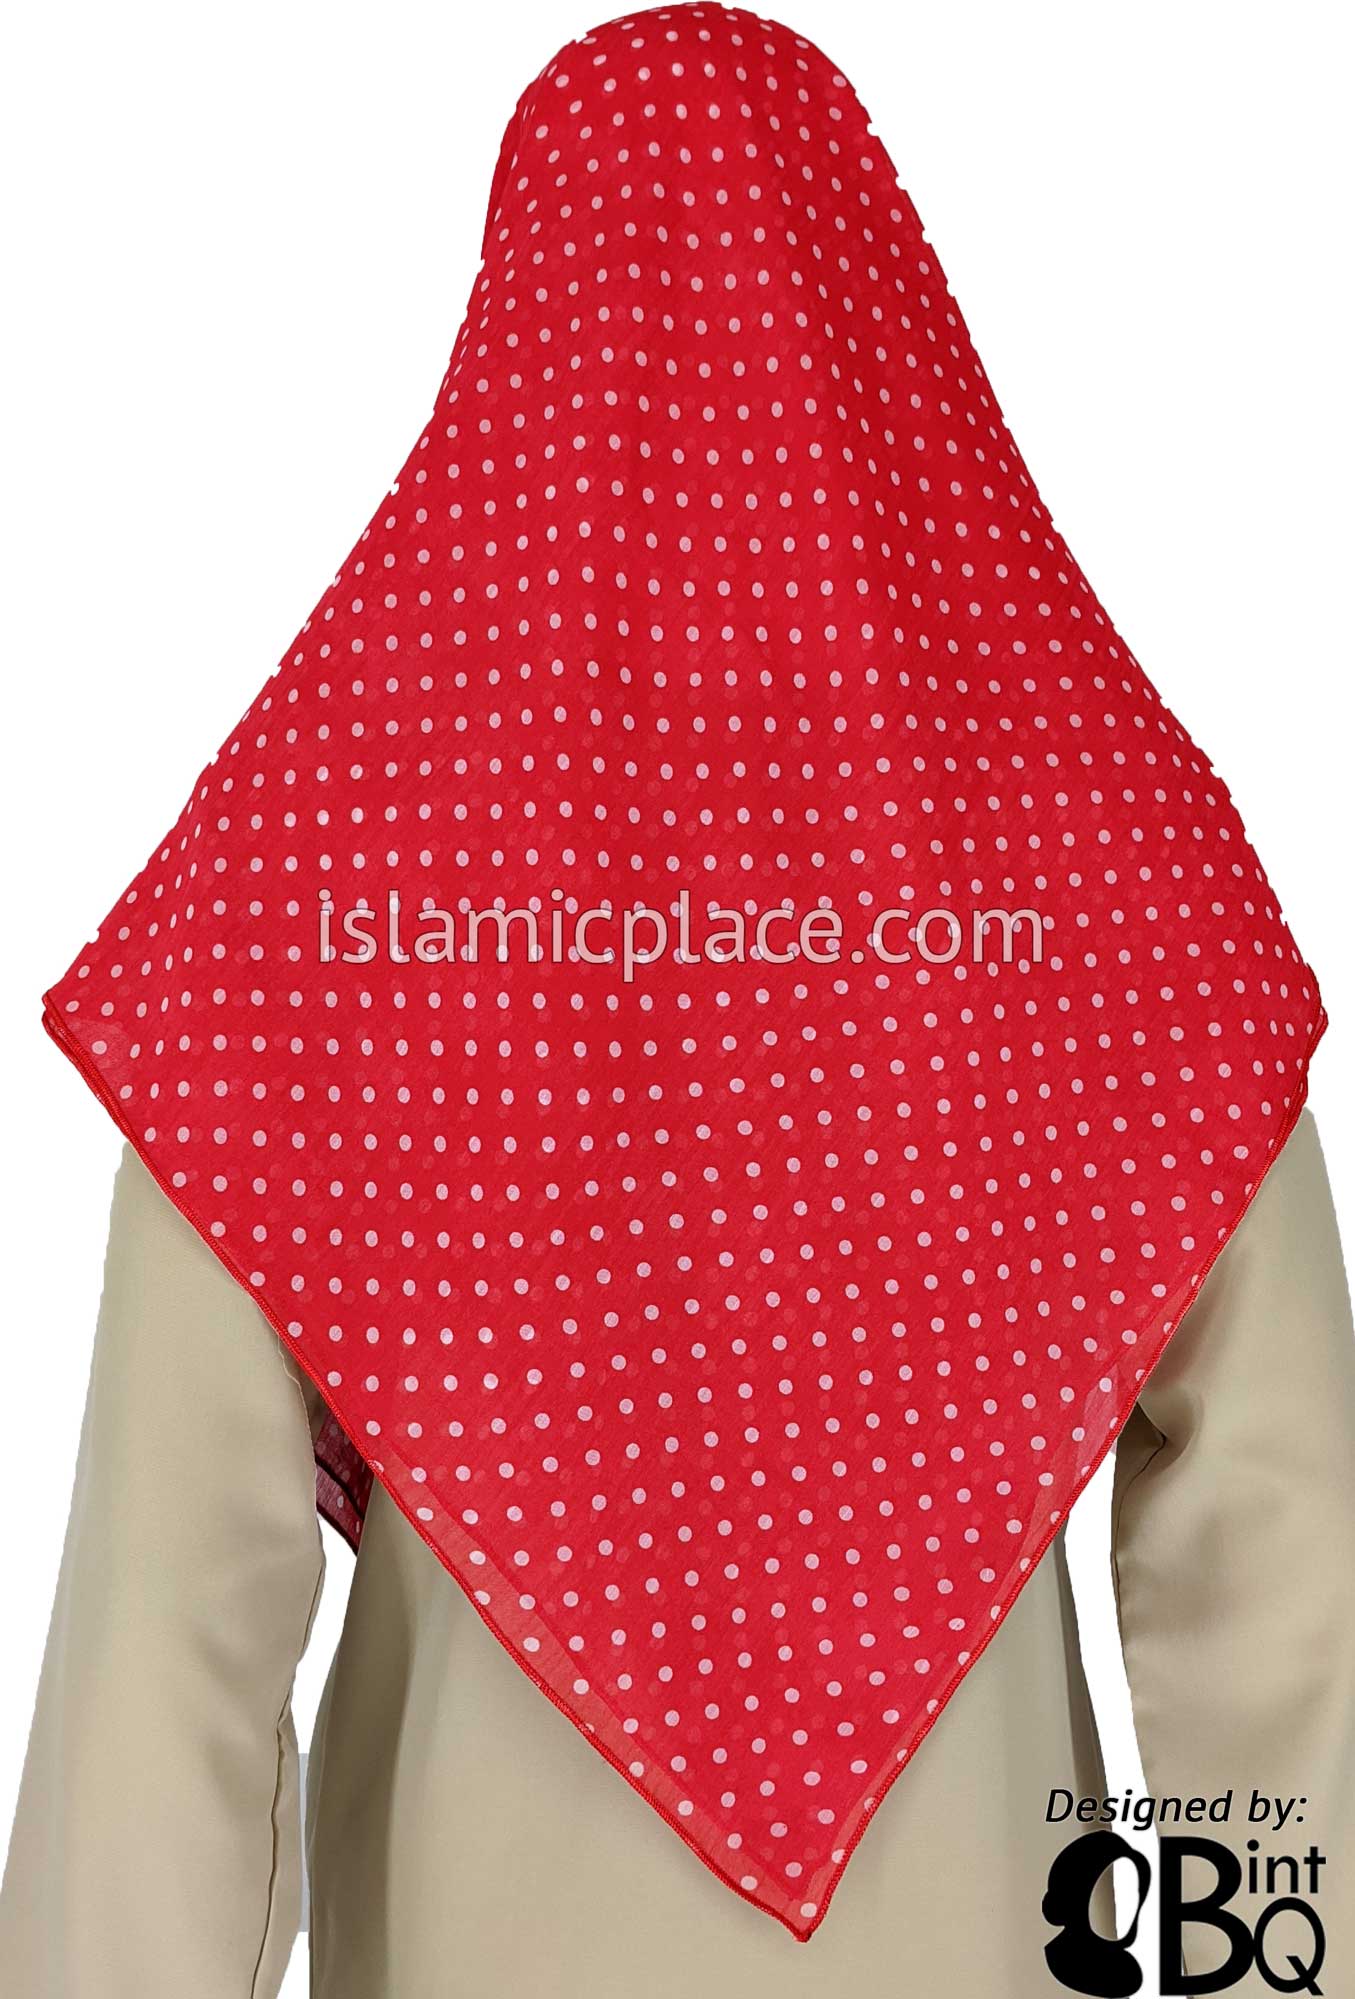 Blush Berry Pink with Small White Polka Dots - 45" Square Printed Khimar